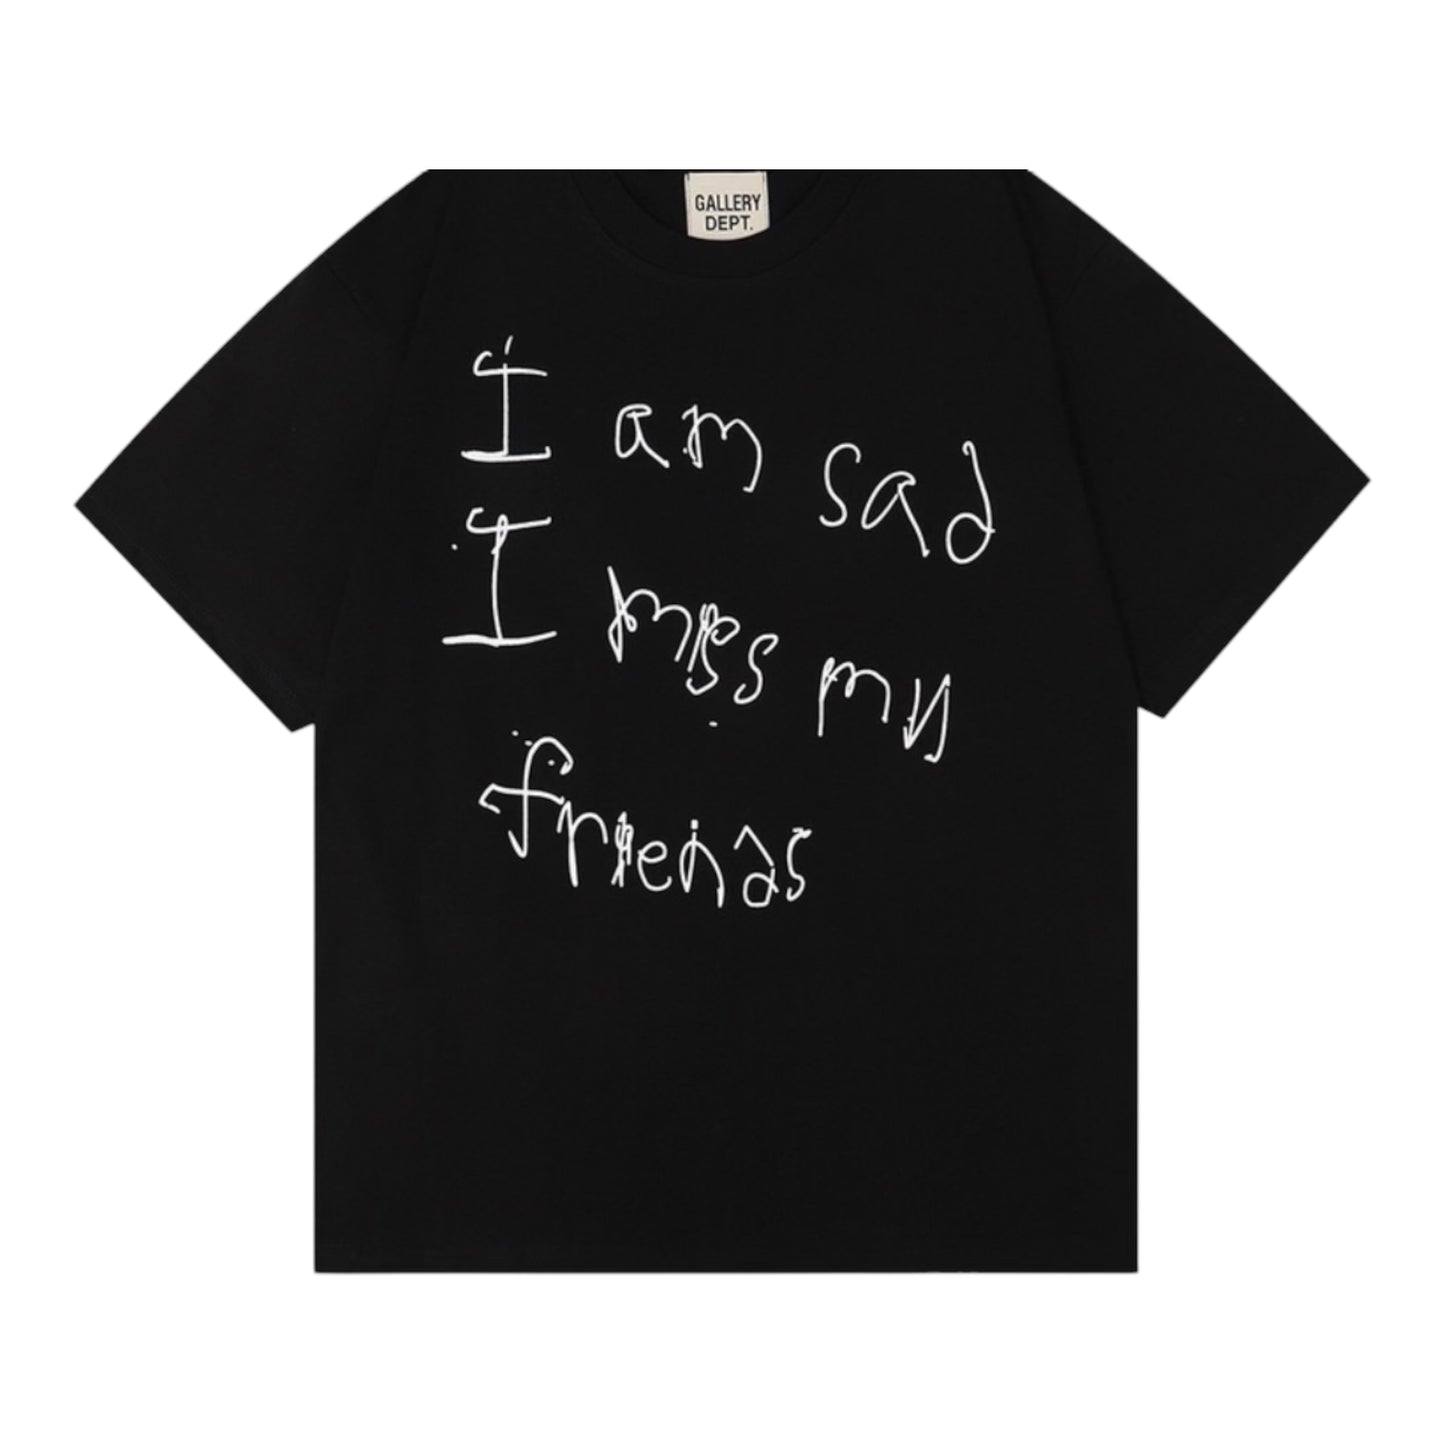 Lonely Tee